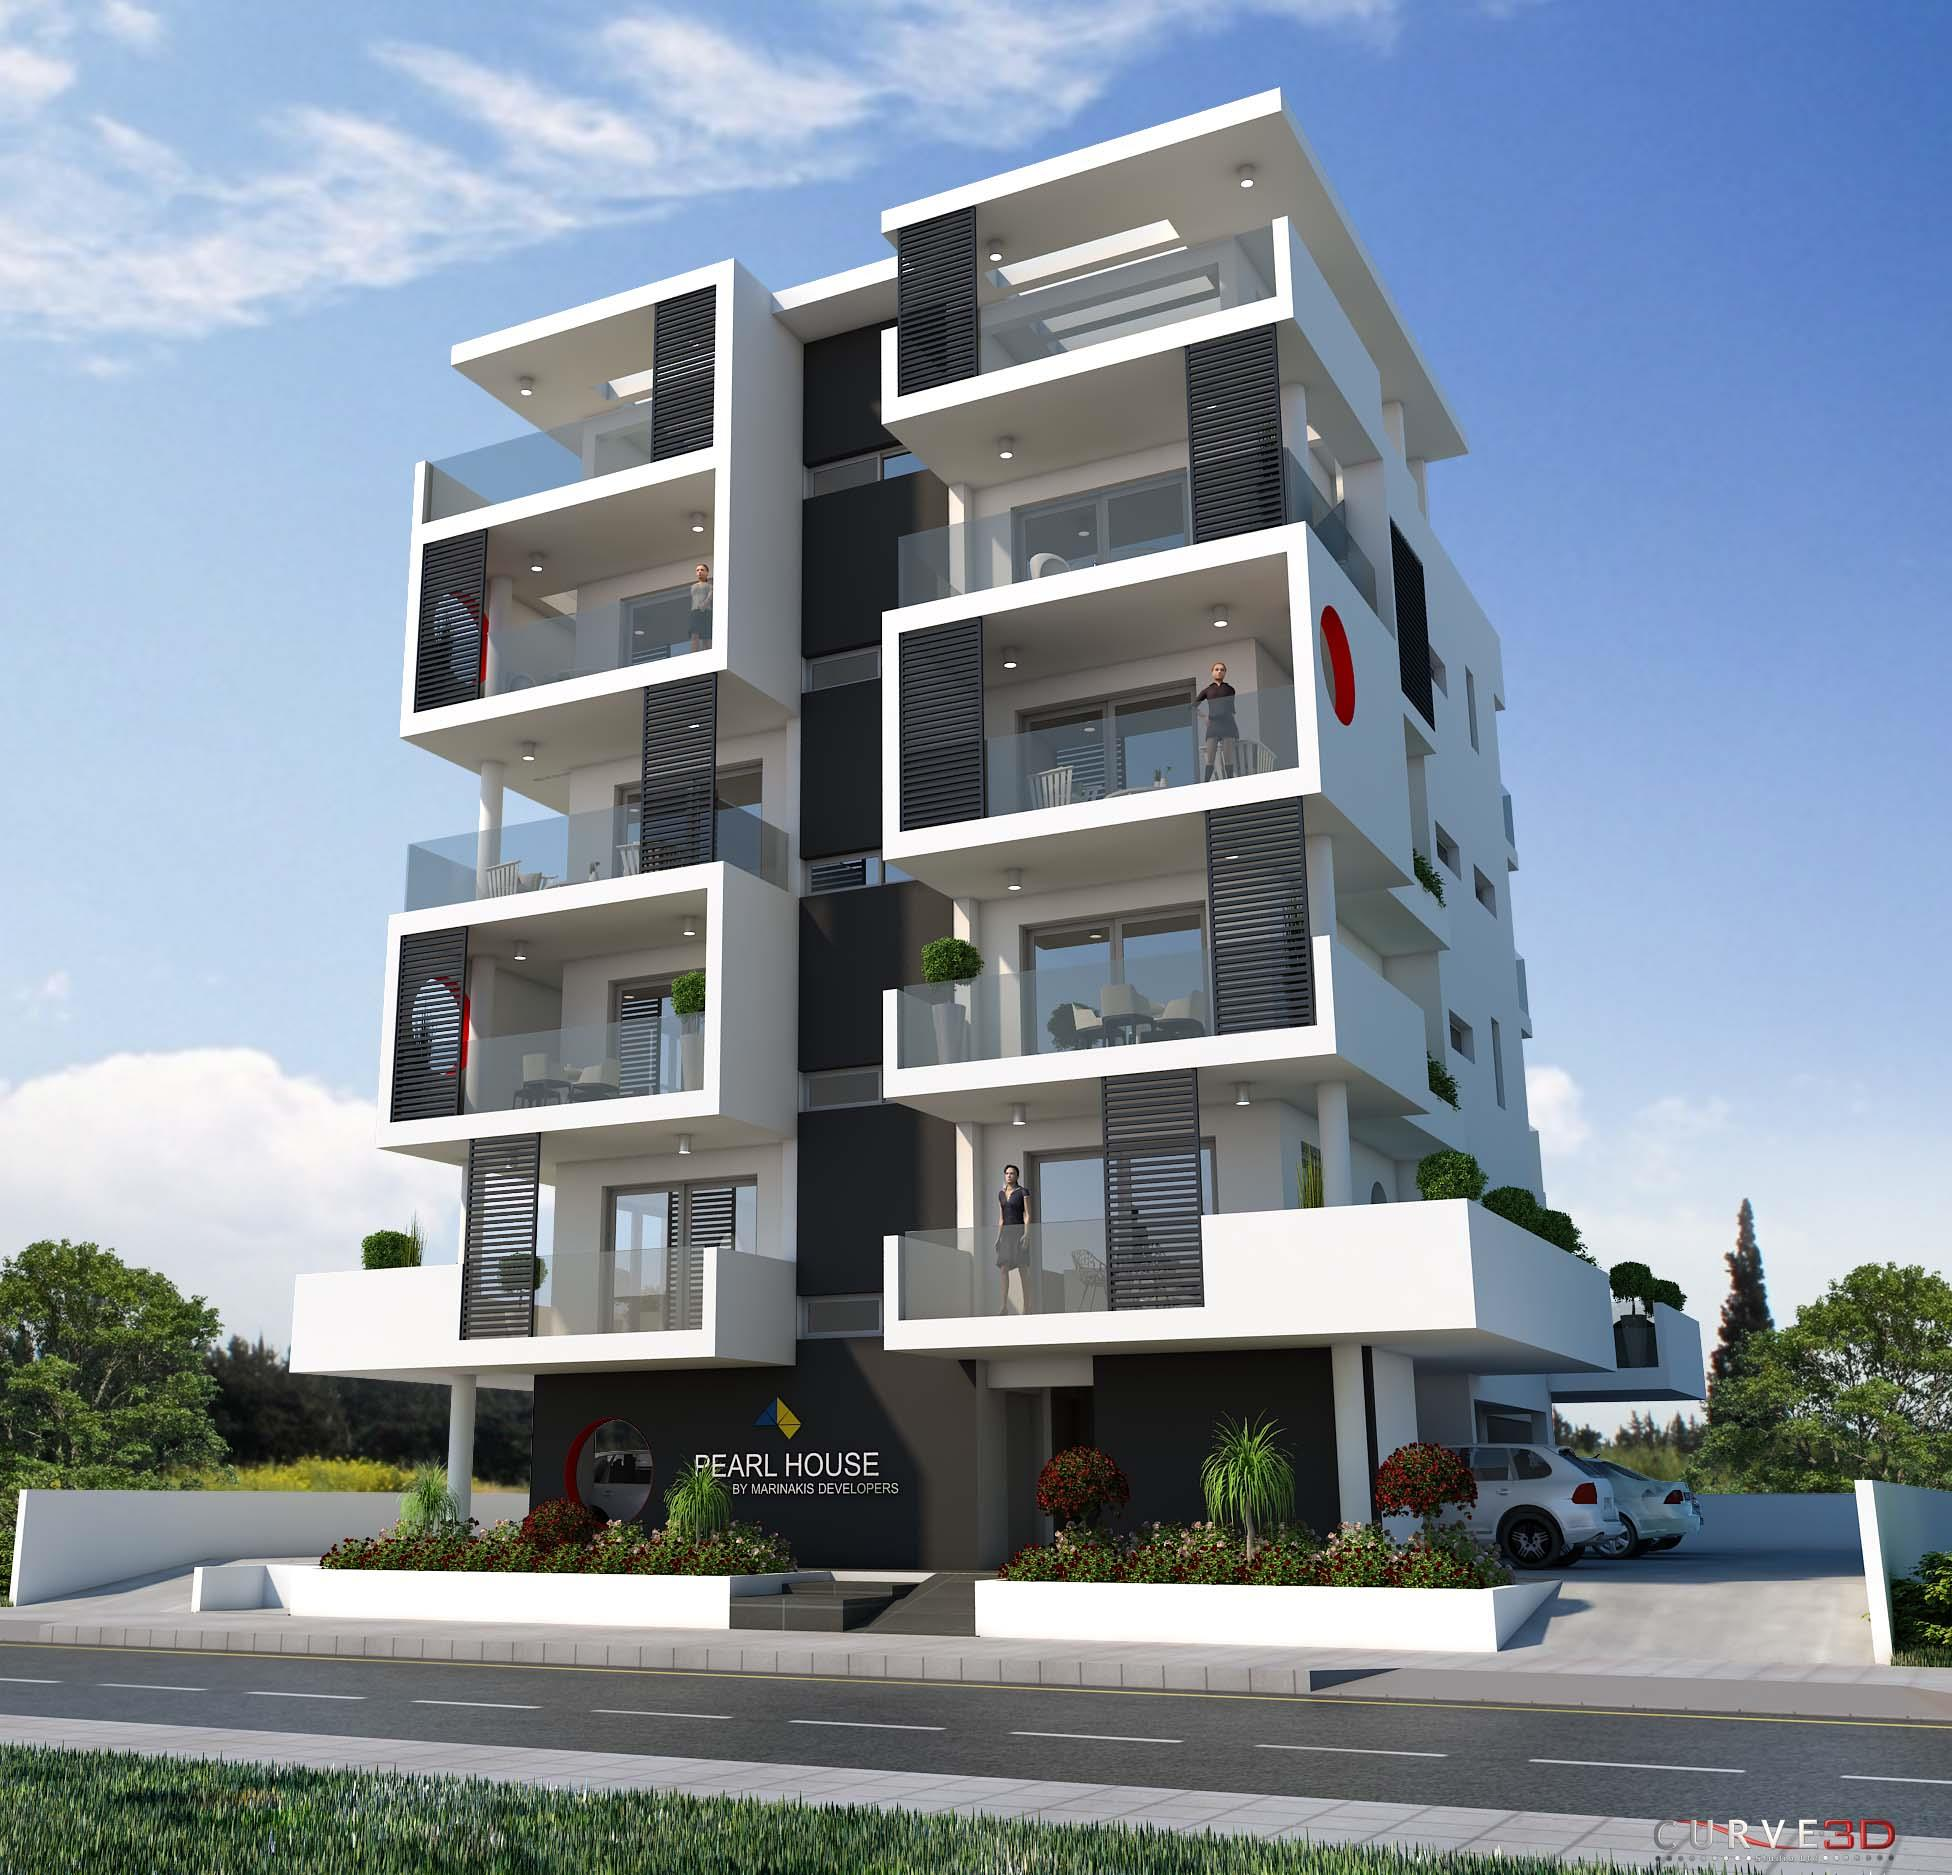 8 Deluxe Apartments off-plan at Larnaca We offer eight 2 bedroom apartments at this spacious building in the heart of Larnaca, Cyprus The 6 of the apartments are in the 1 ST, 2 nd and 3 th floor and